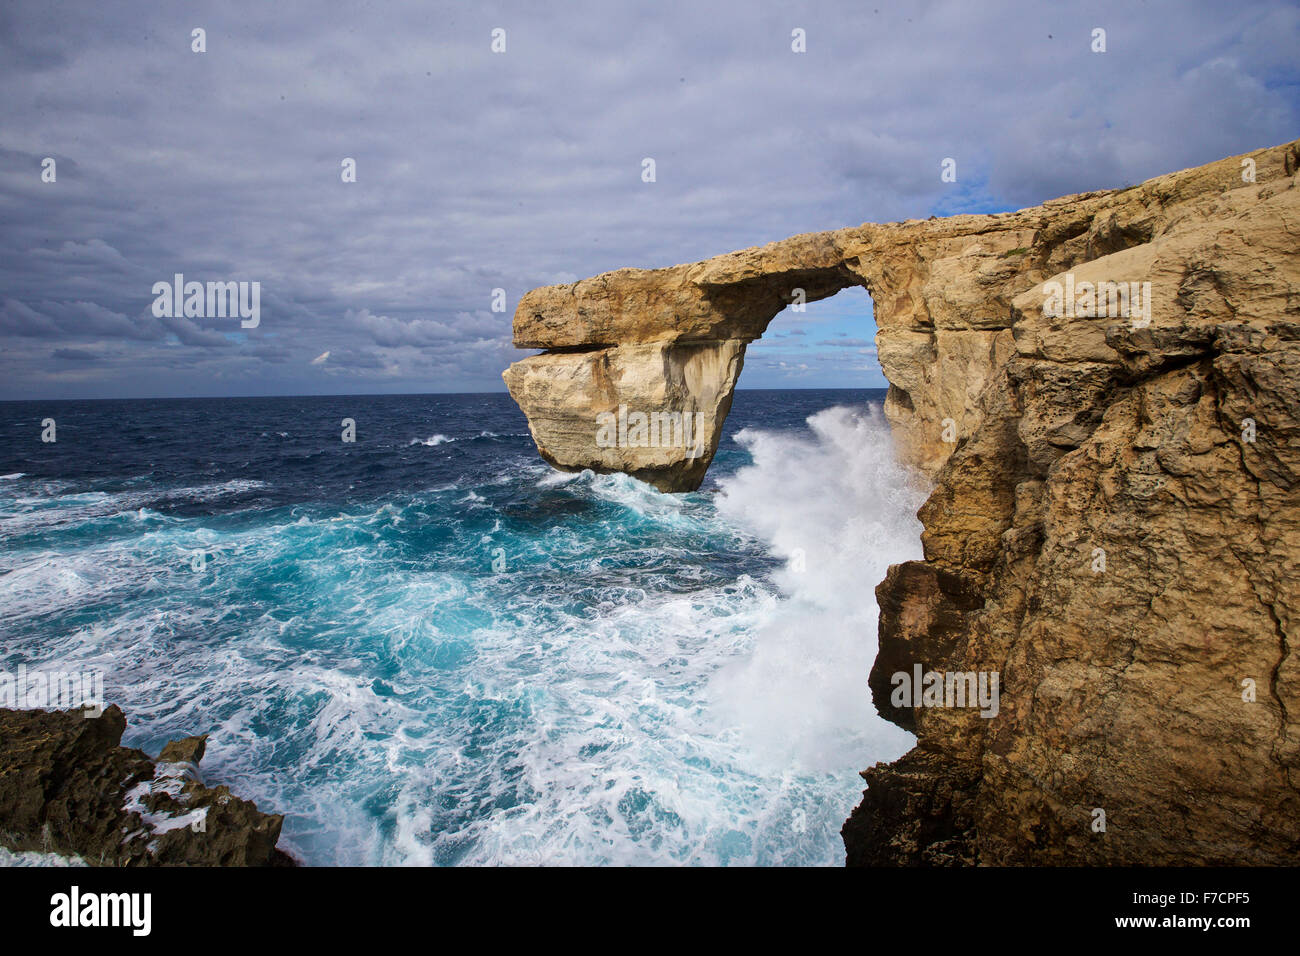 (151129) -- VALLETTA, Nov. 29, 2015 (Xinhua) -- Photo taken on Nov. 28, 2015, in Gozo, Malta shows the view of the Azure Window. The Azure Window, Malta's famous natural landscape, is located in its second largest island Gozo. The Azure Window is one of the most photographed vistas of Malta, and is particularly spectacular during the winter, when waves crash high inside the arch. At the end of the cliff, the Azure Window is a giant doorway, through which one can admire the water expanse beyond the cliff. The sea around is very deep and of a dark blue hue, which explains why it is called the Az Stock Photo